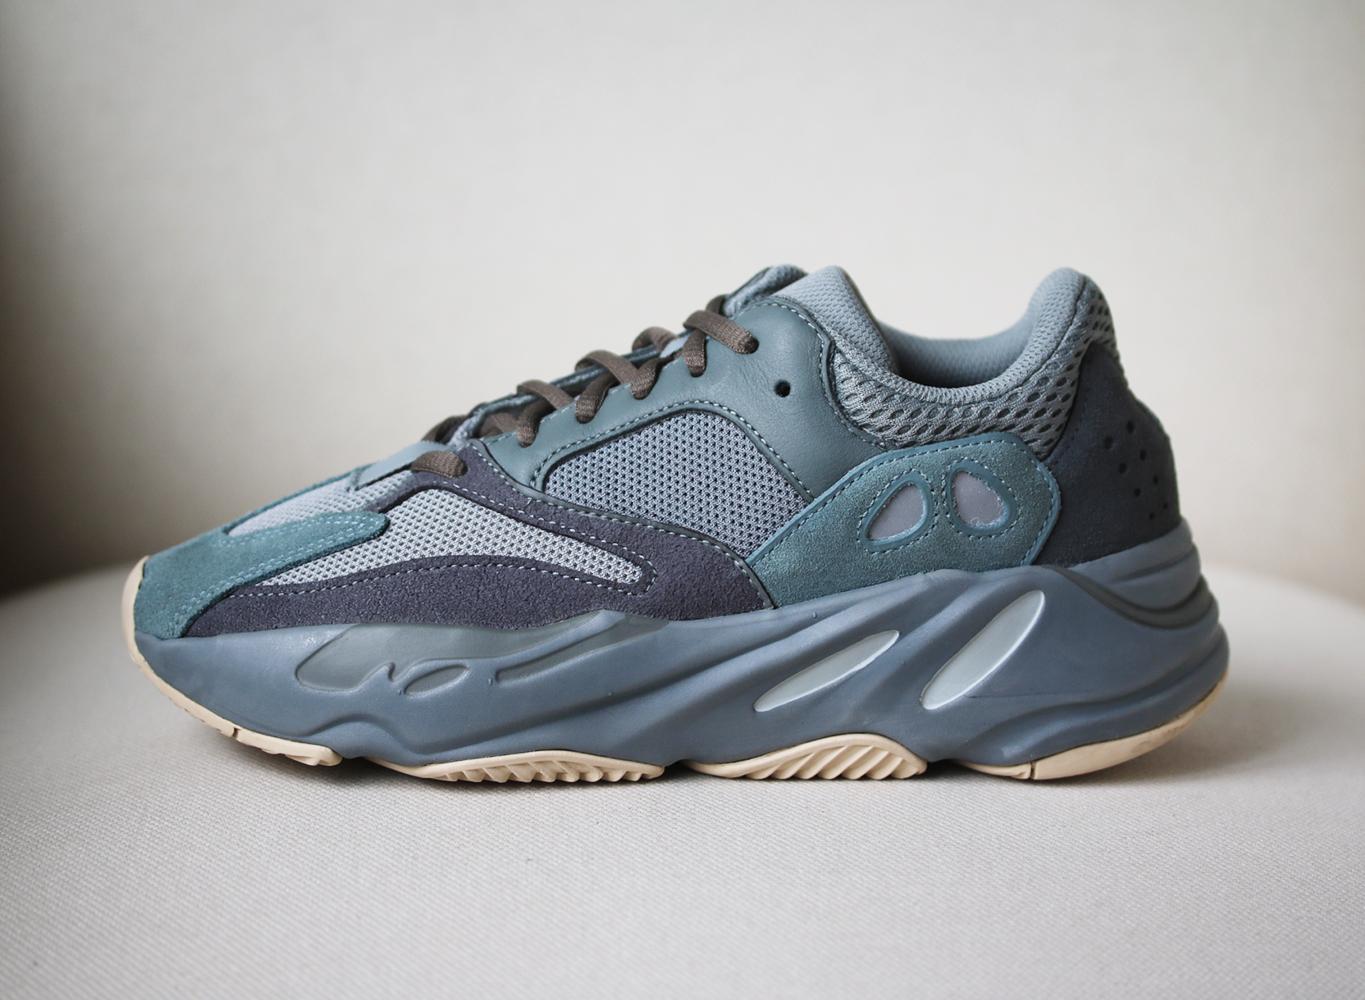 Since adidas Originals' first collaboration with Kanye West back in 2013, each release has garnered huge success - we expect his 'Yeezy Boost 700 V2' sneakers will cause the same kind of frenzy. 
This teal blue and grey pair is made from overlapping